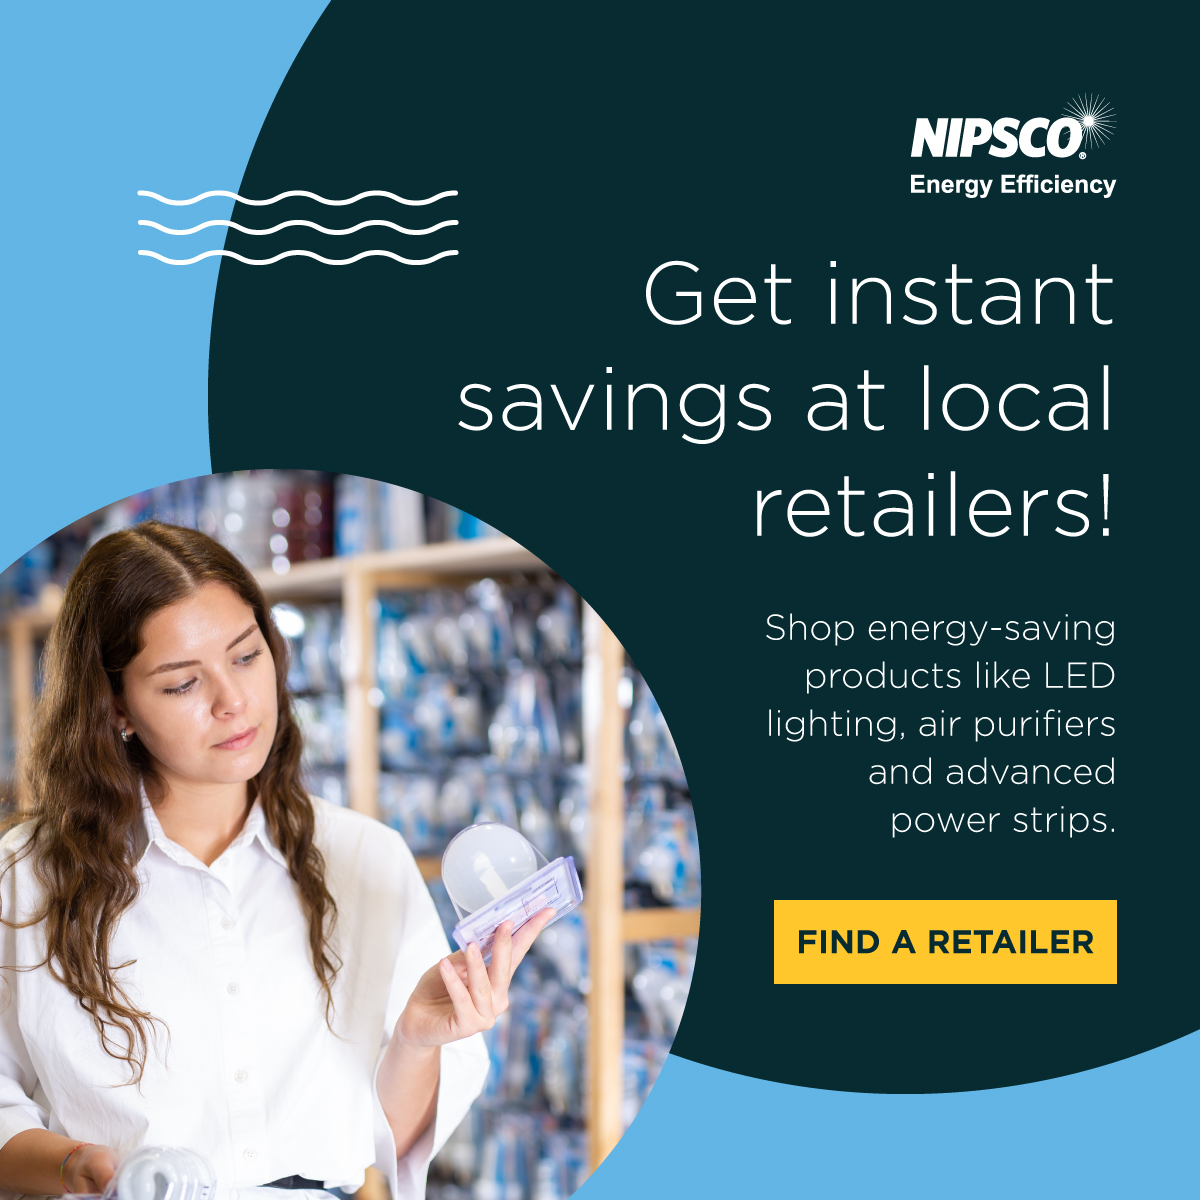 What Does Nipsco Stand For